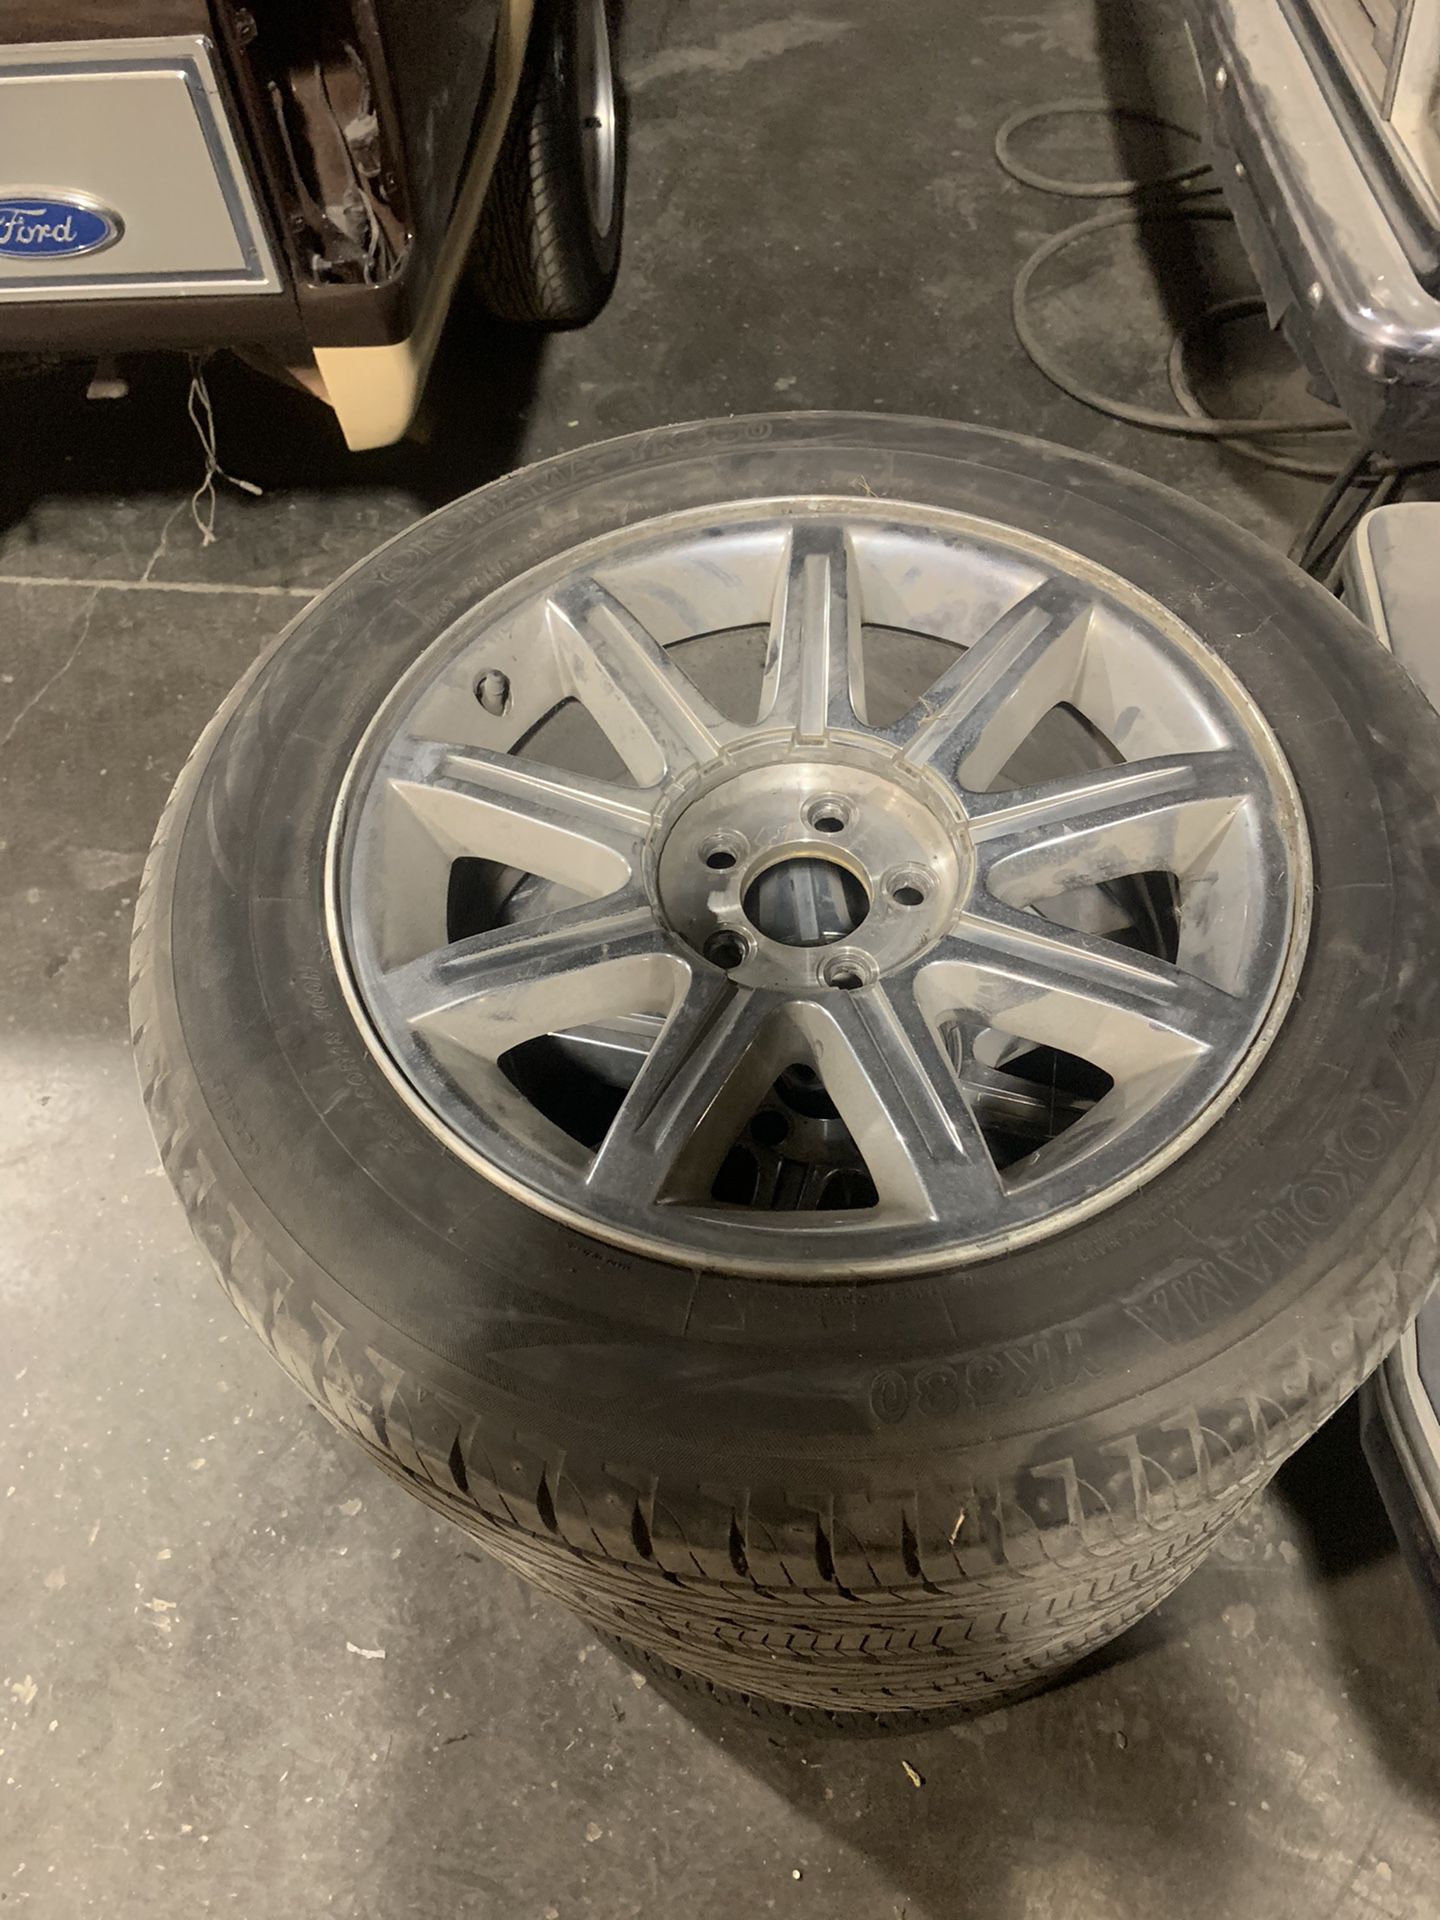 Chrysler 300 rims and tires almost new $300